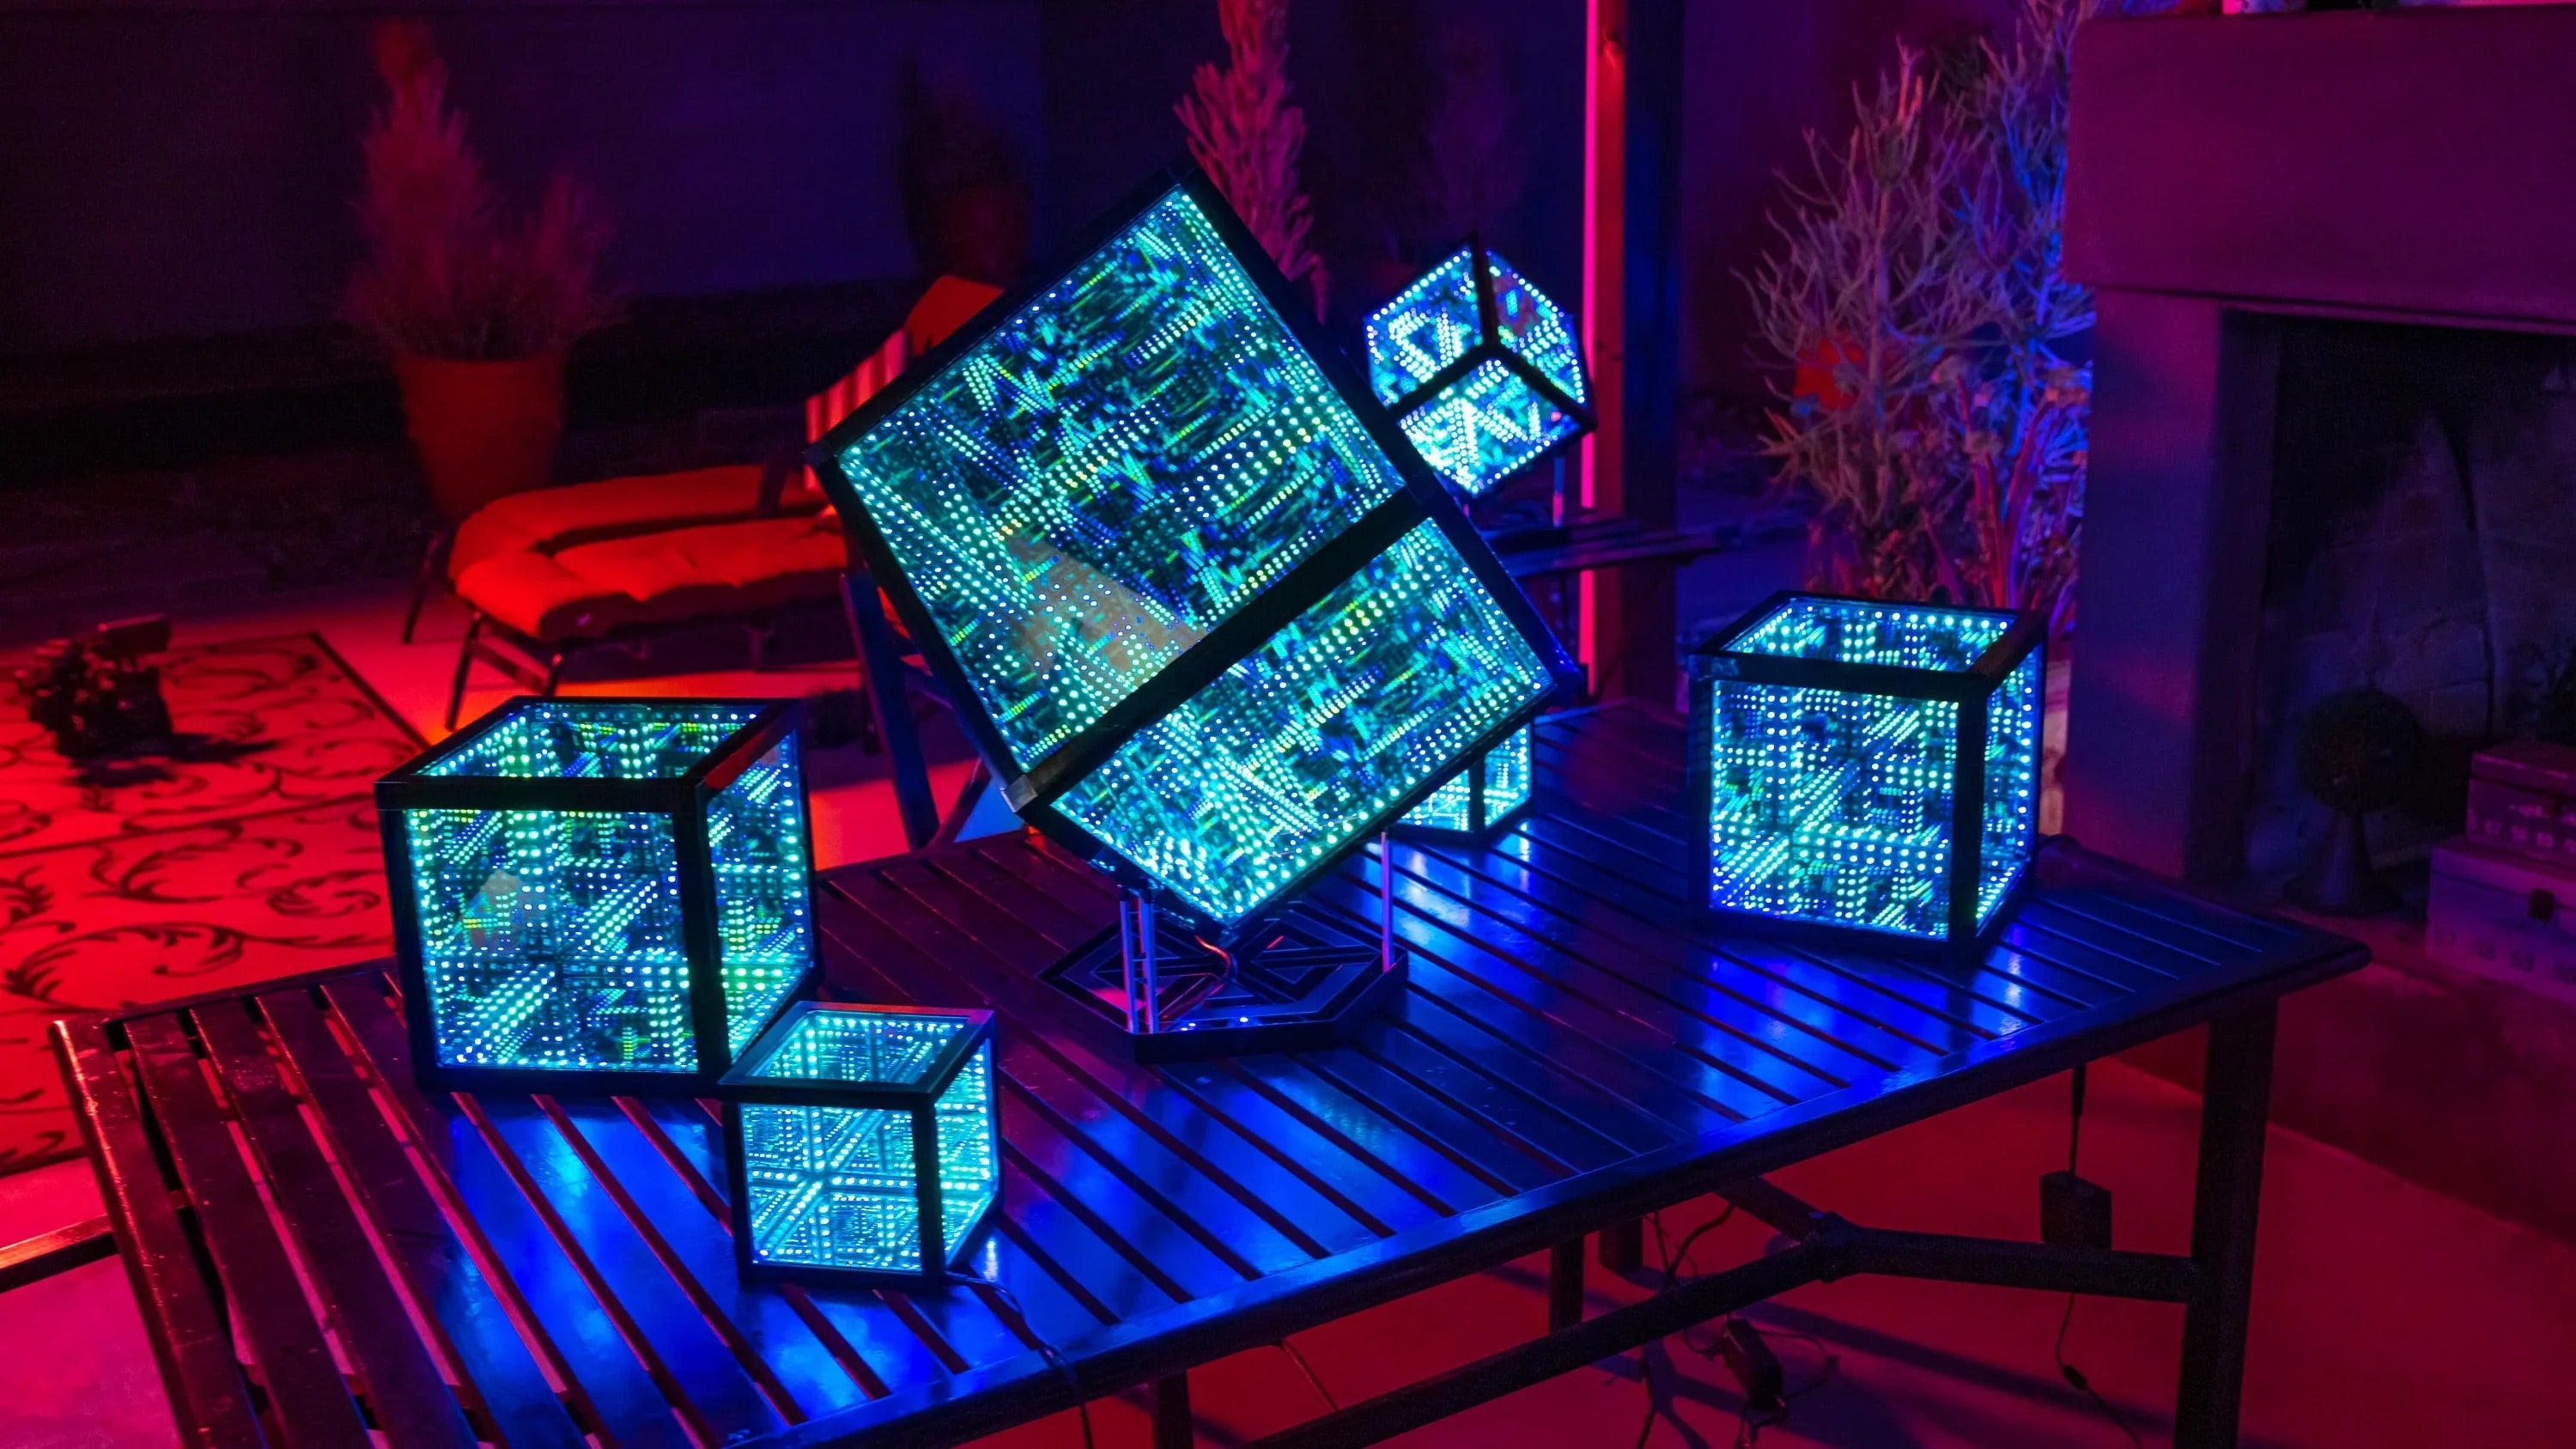 Five cubes with color changing lights placed on patio table for decor for party among friends for New Years Eve